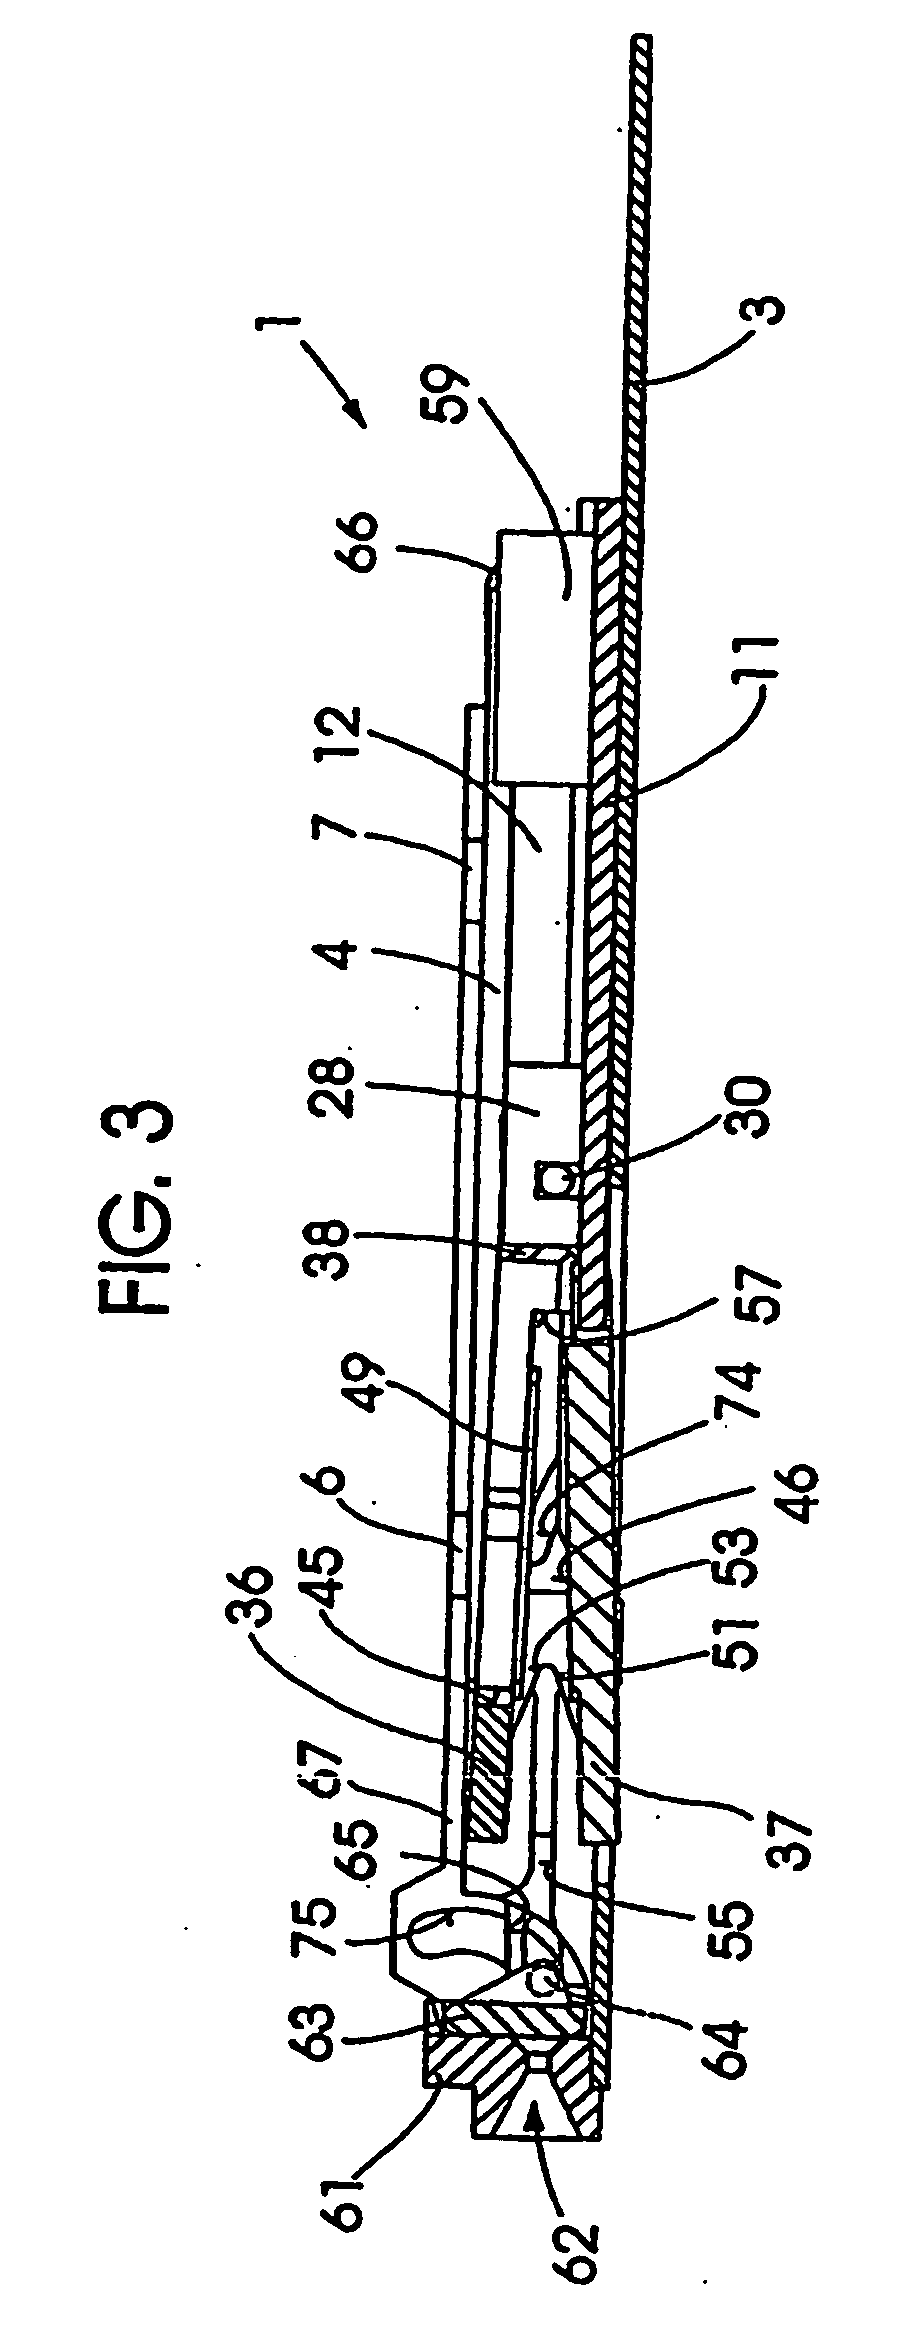 Chip card receiving device comprising a carriage for holding a chip card